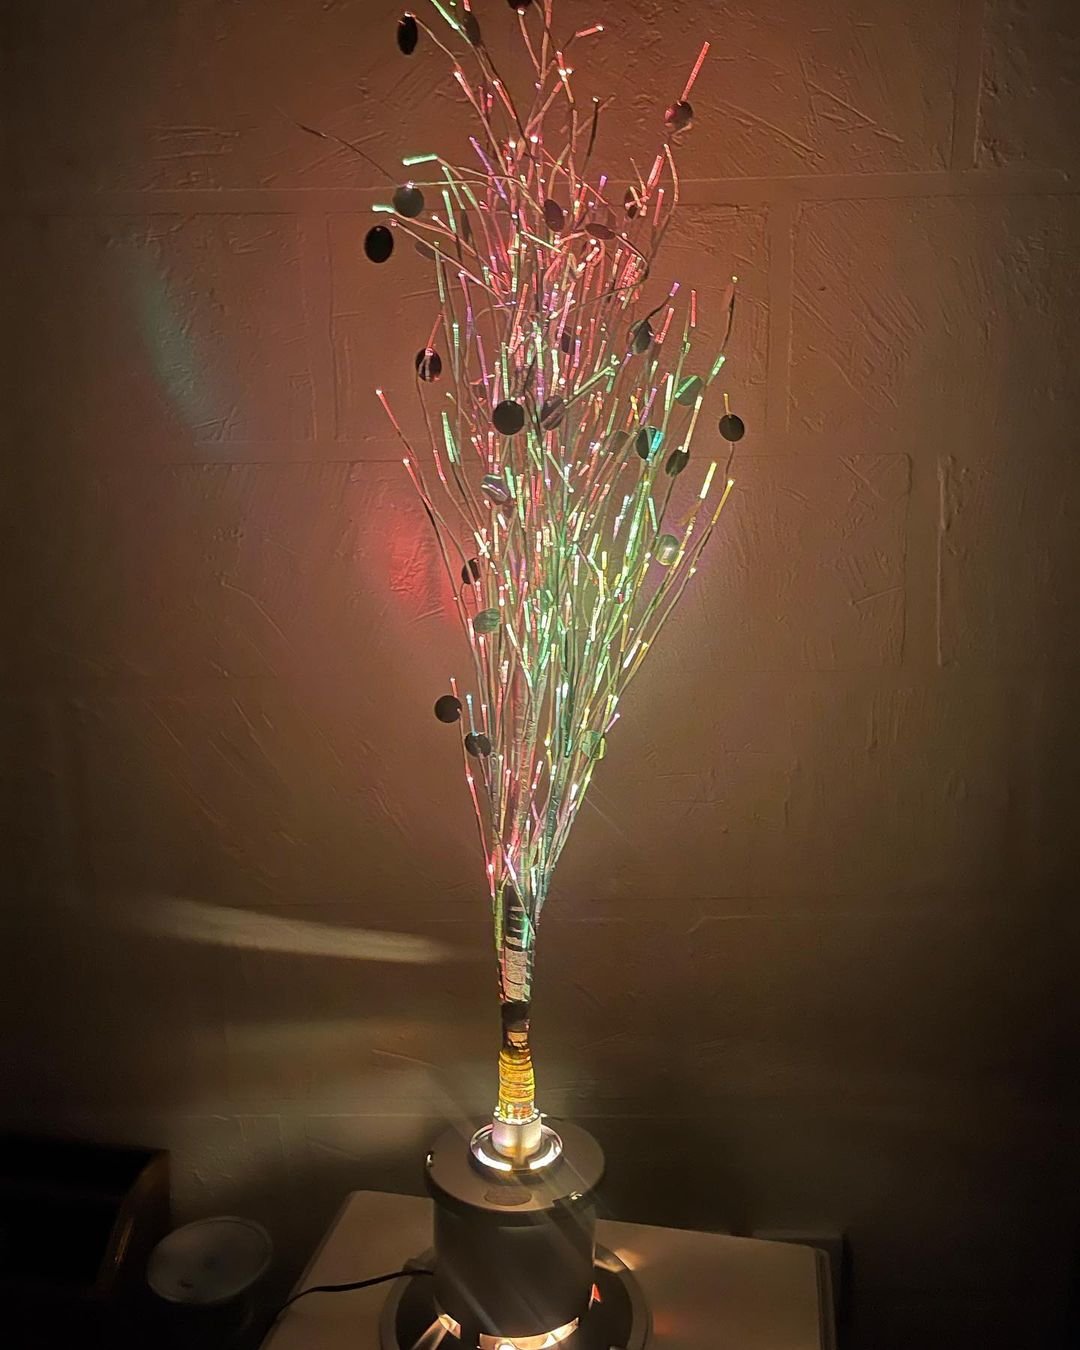 A vibrant vase with a champagne bottle, illuminated, accompanied by a Twig Tree.